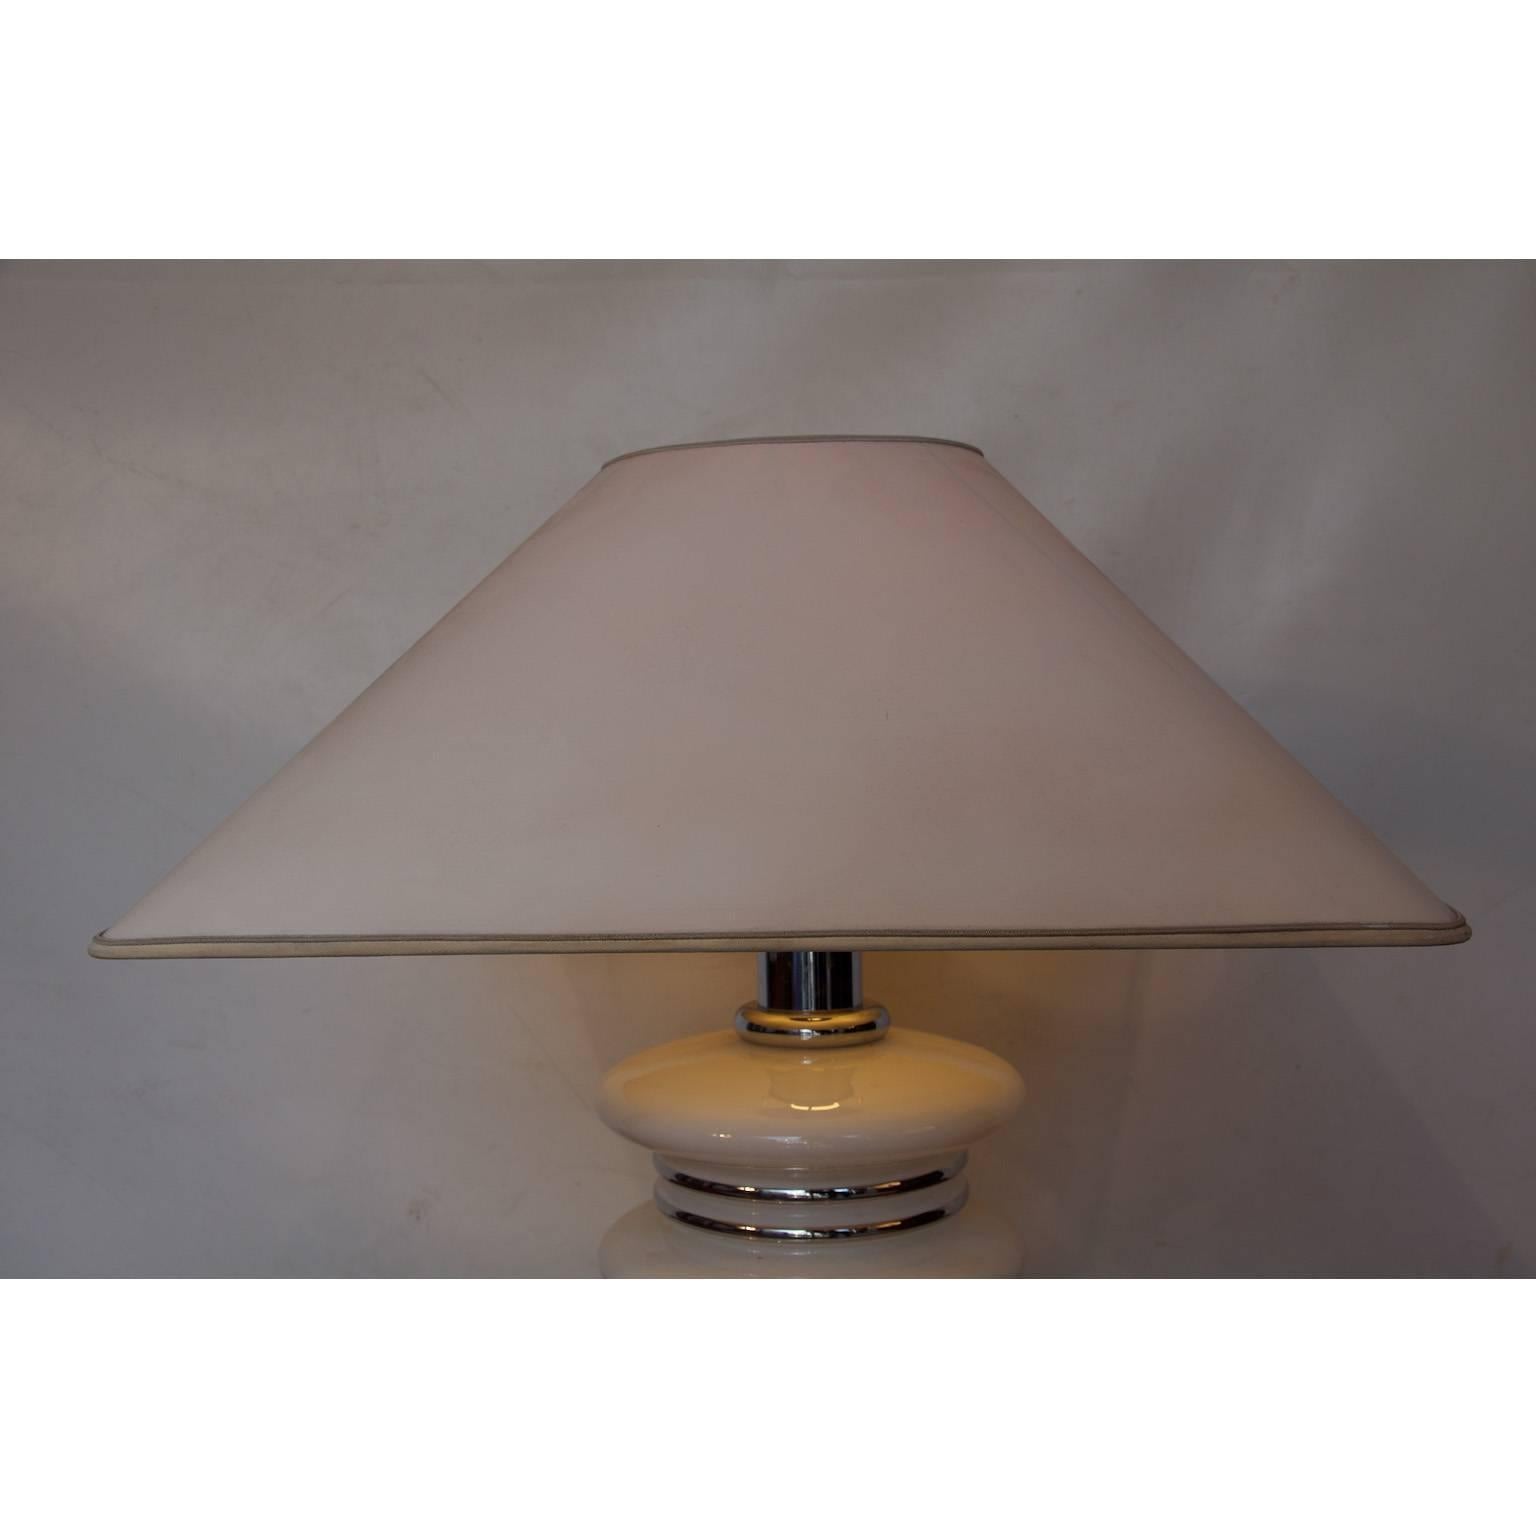 White glass and chrome table lamp from the Mid-century.

All our lights are checked and tested. Because of the lower voltage standard in the USA (110v vs 220v), European lighting can be safely used in the USA. If a lamp has a plug, only the plug